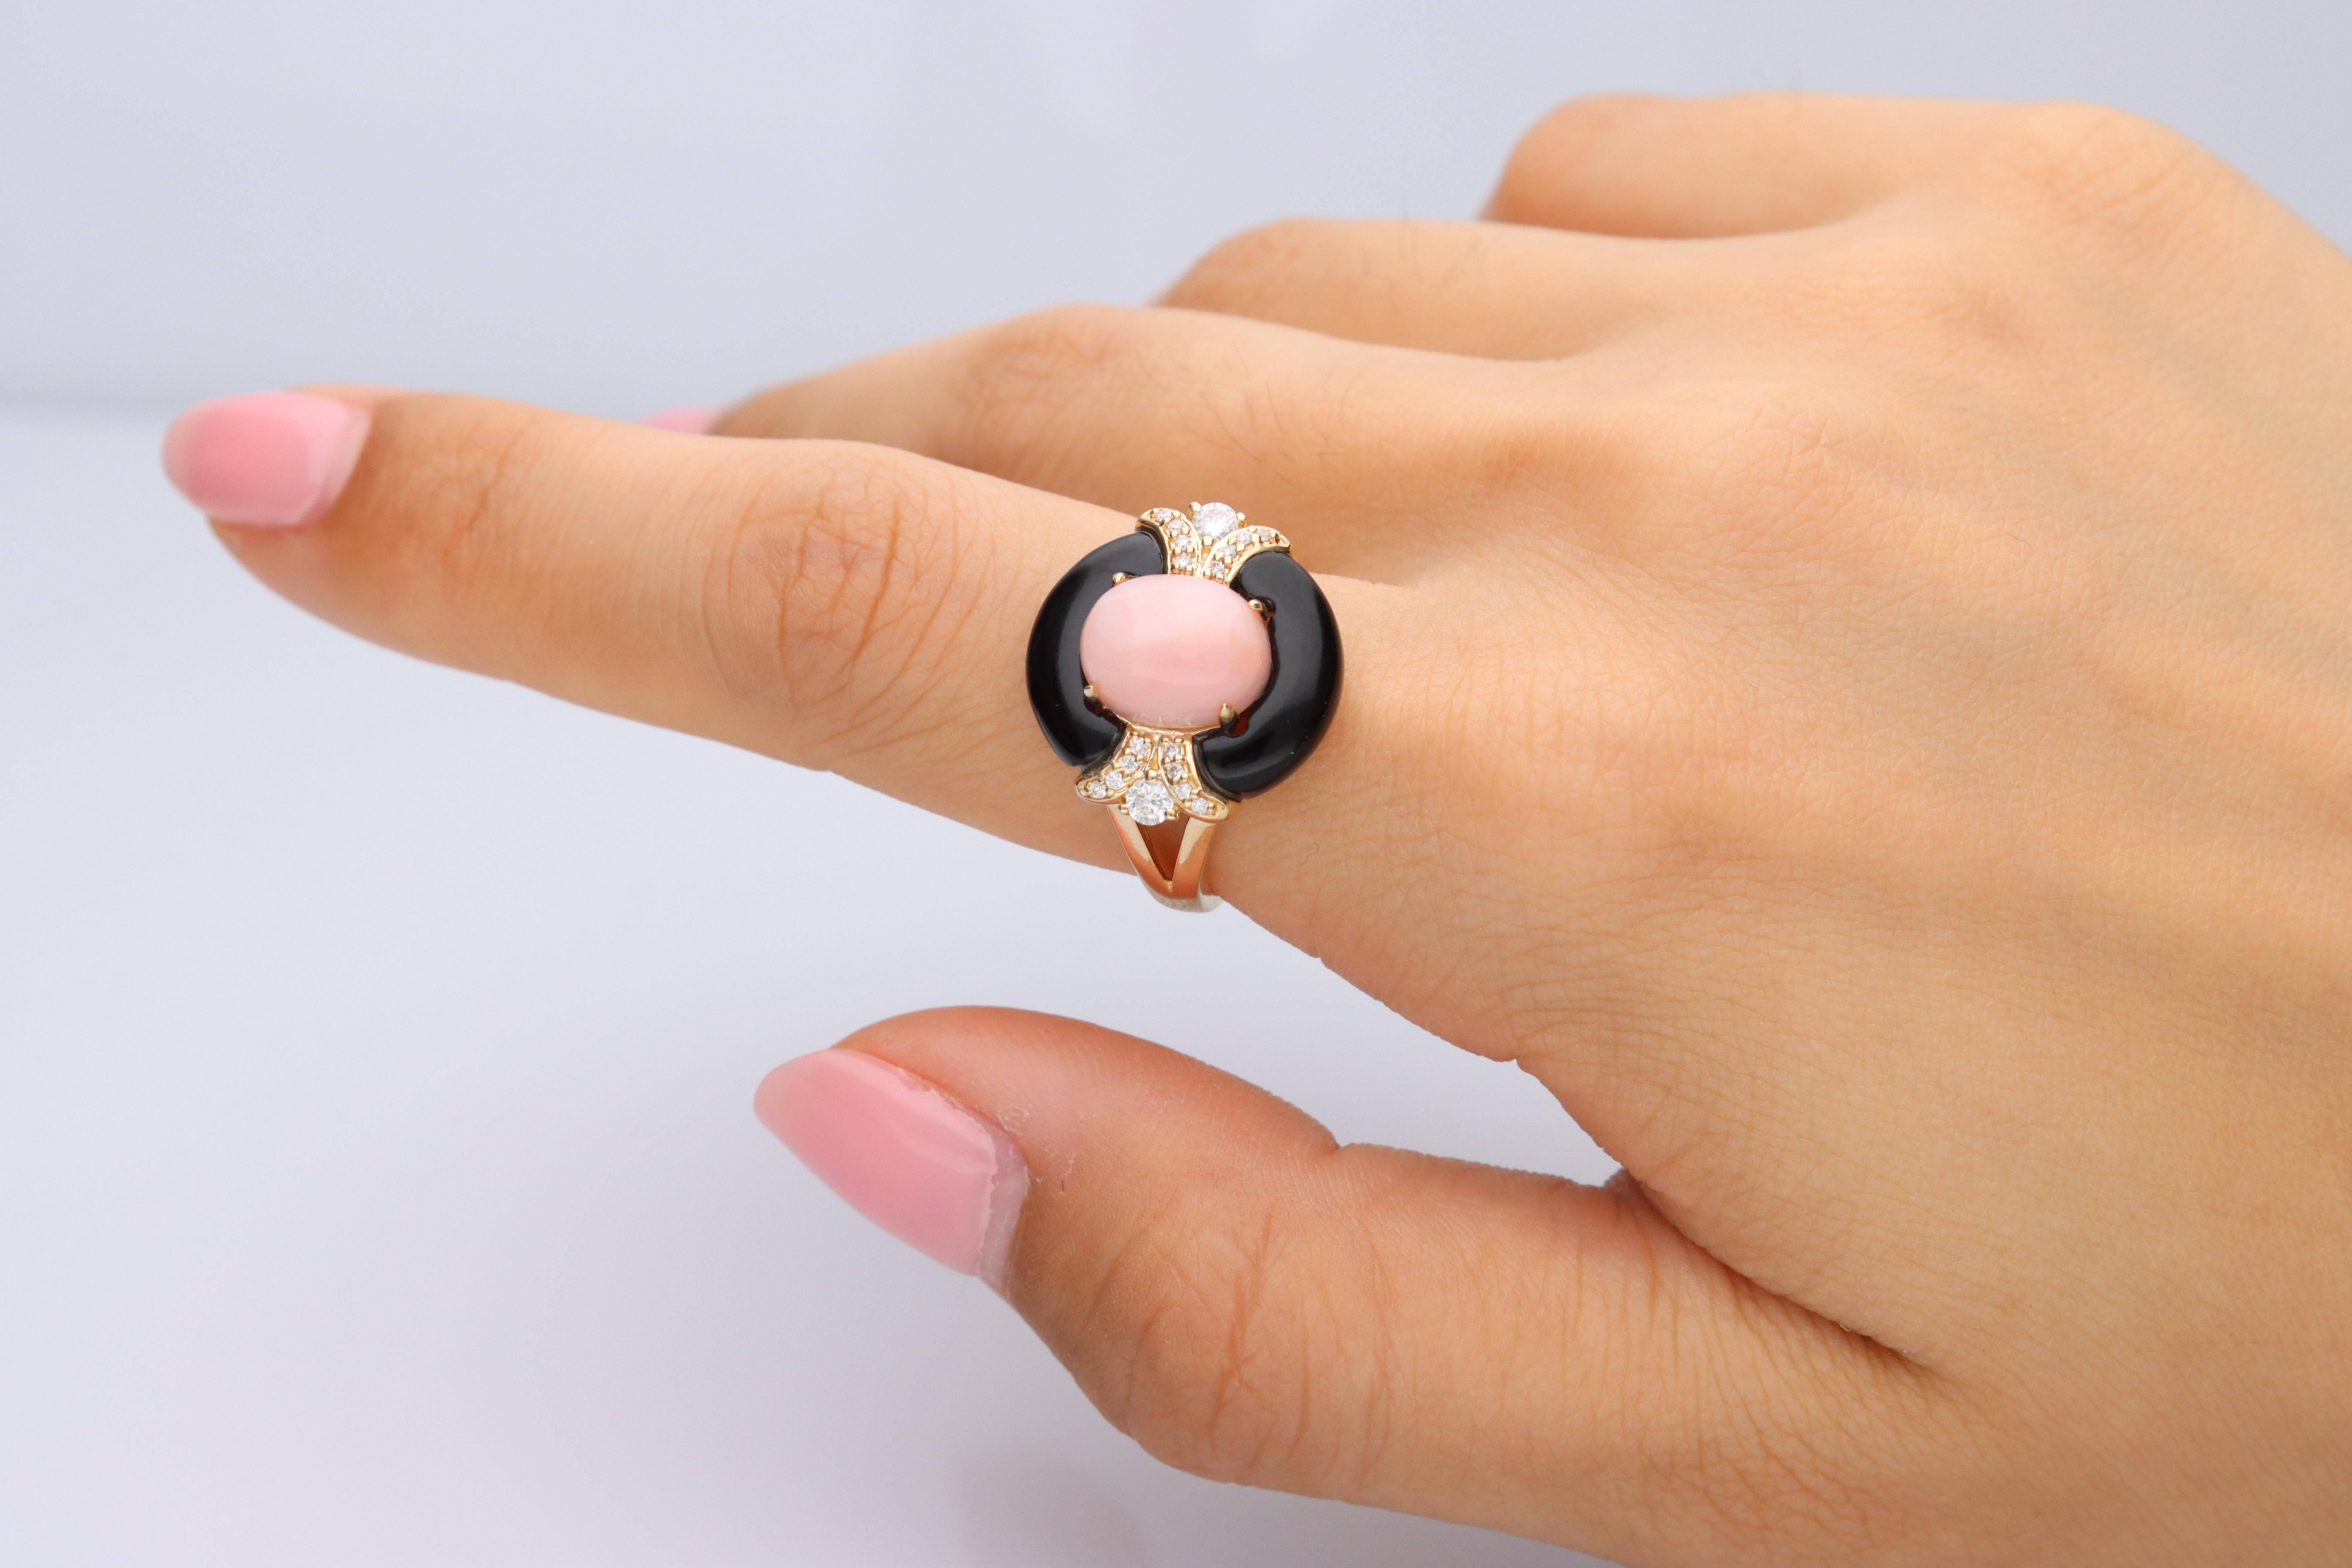 Stunning, timeless and classy eternity Unique ring. Decorate yourself in luxury with this Gin & Grace ring. The 14k Yellow Gold jewelry boasts 8x10 mm oval cab Pink Opal (1pcs) 2.16 Carat, Free Size Onyx (2 pcs) 3.81 carat and Round-Cut Diamond (18